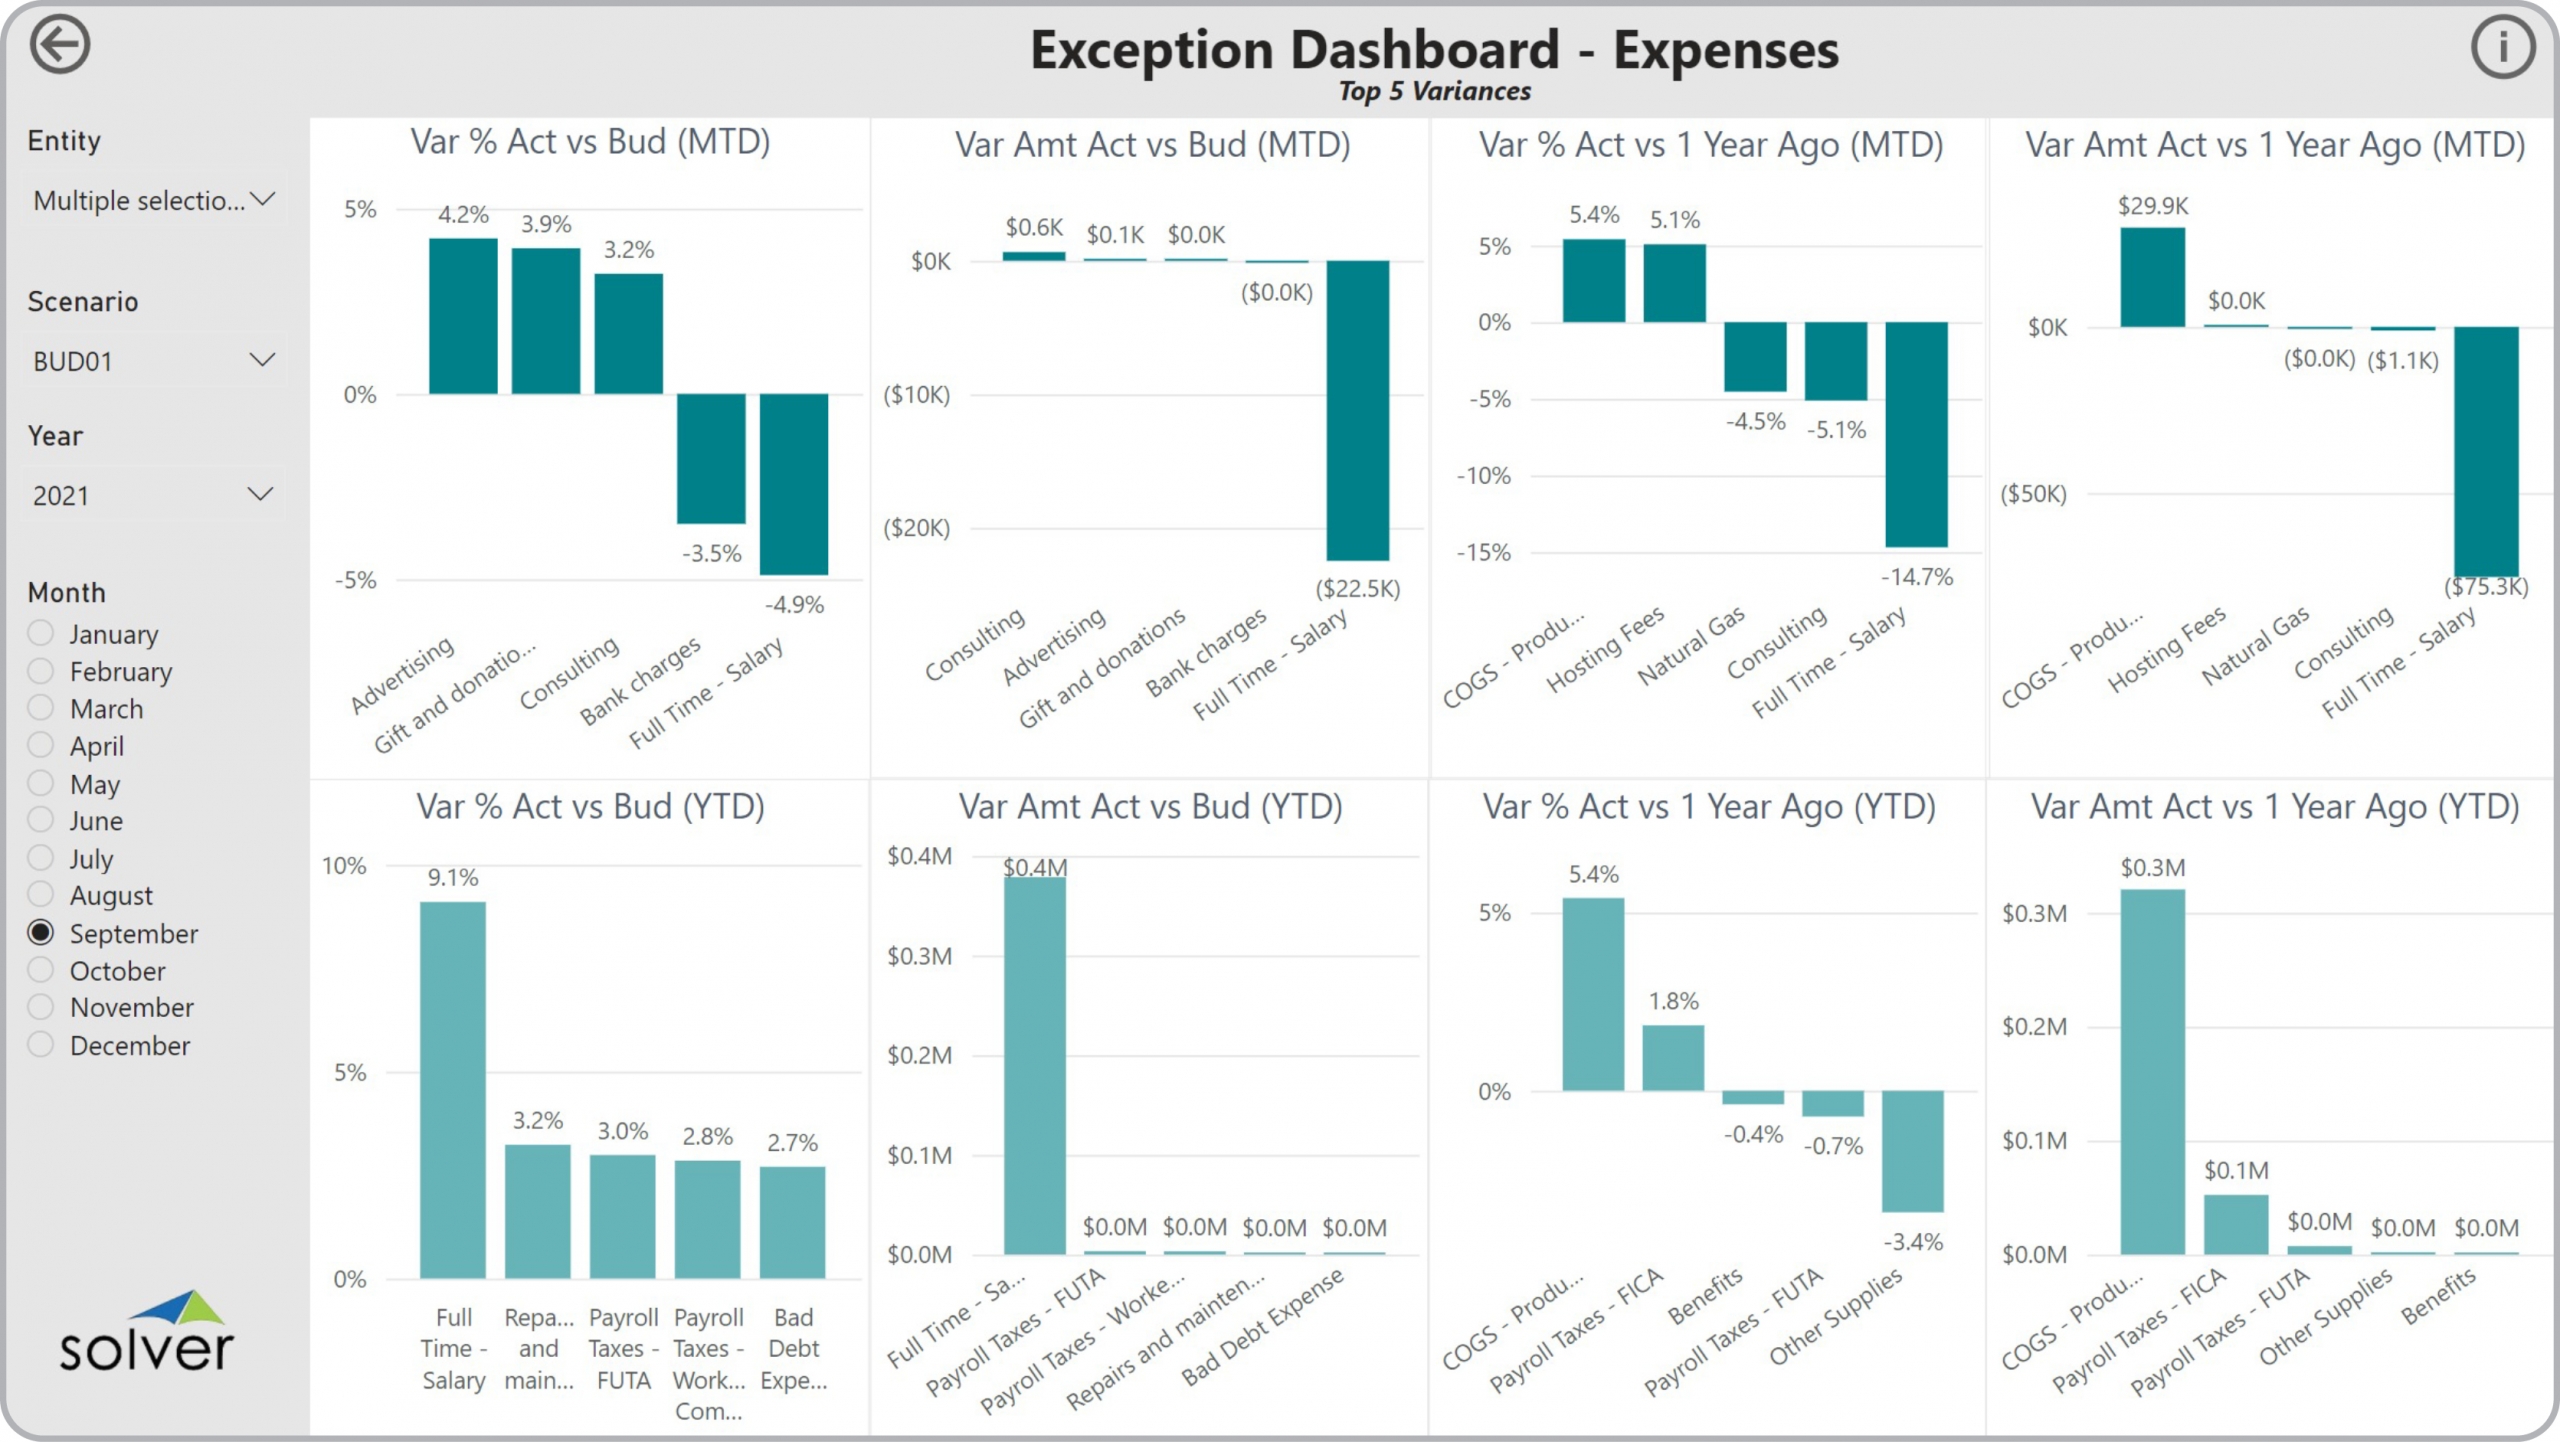 Example of an Expense Exception Dashboard to Streamline the Monthly Analysis Process